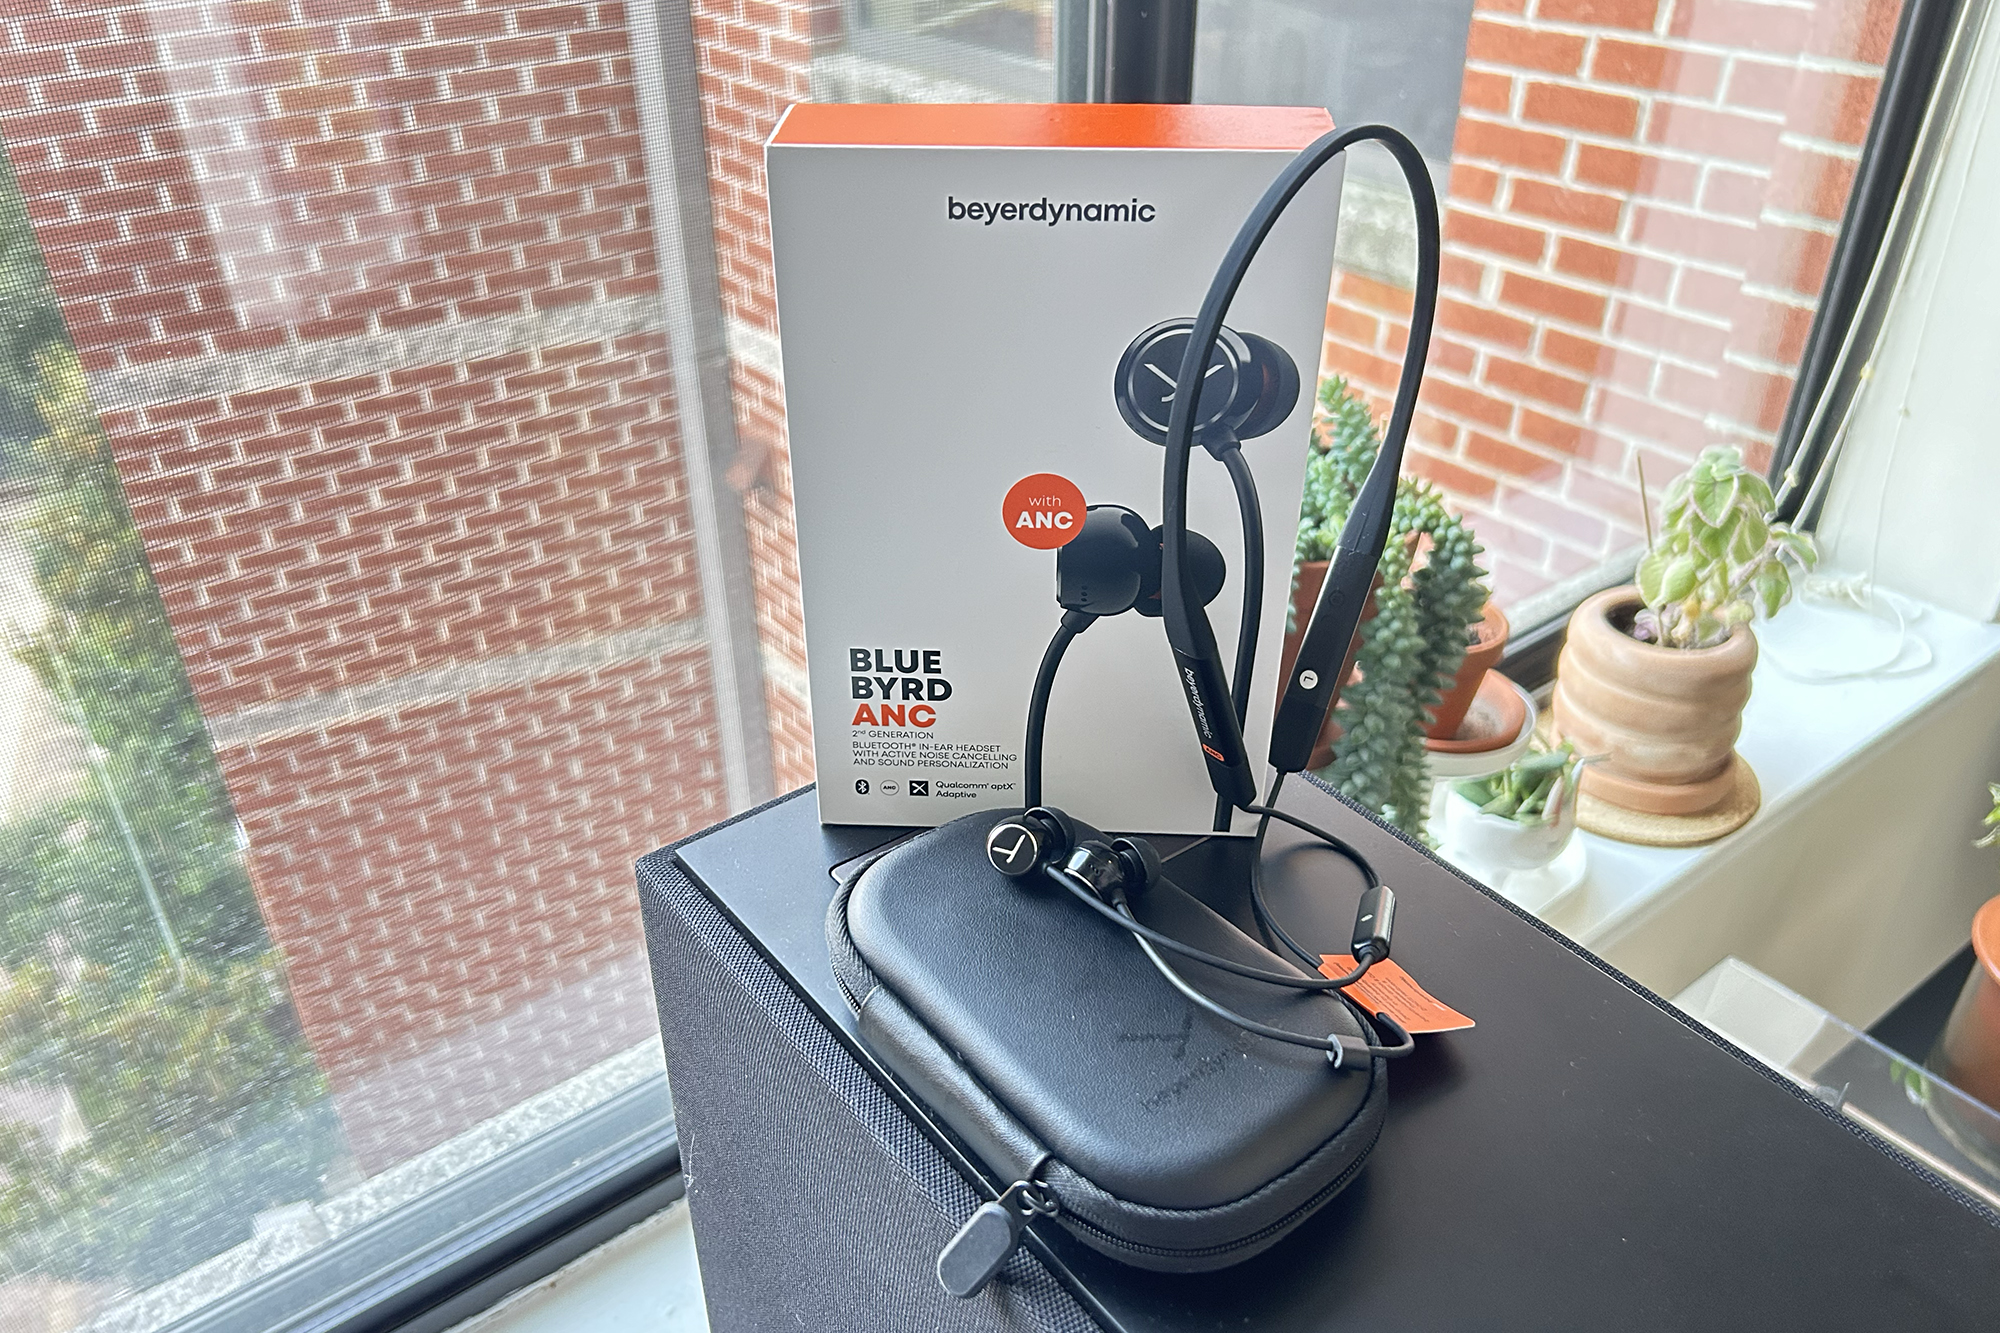 beyerdynamic Blue BYRD ANC neckband earbuds, box, and case sitting on a speaker in front of a window